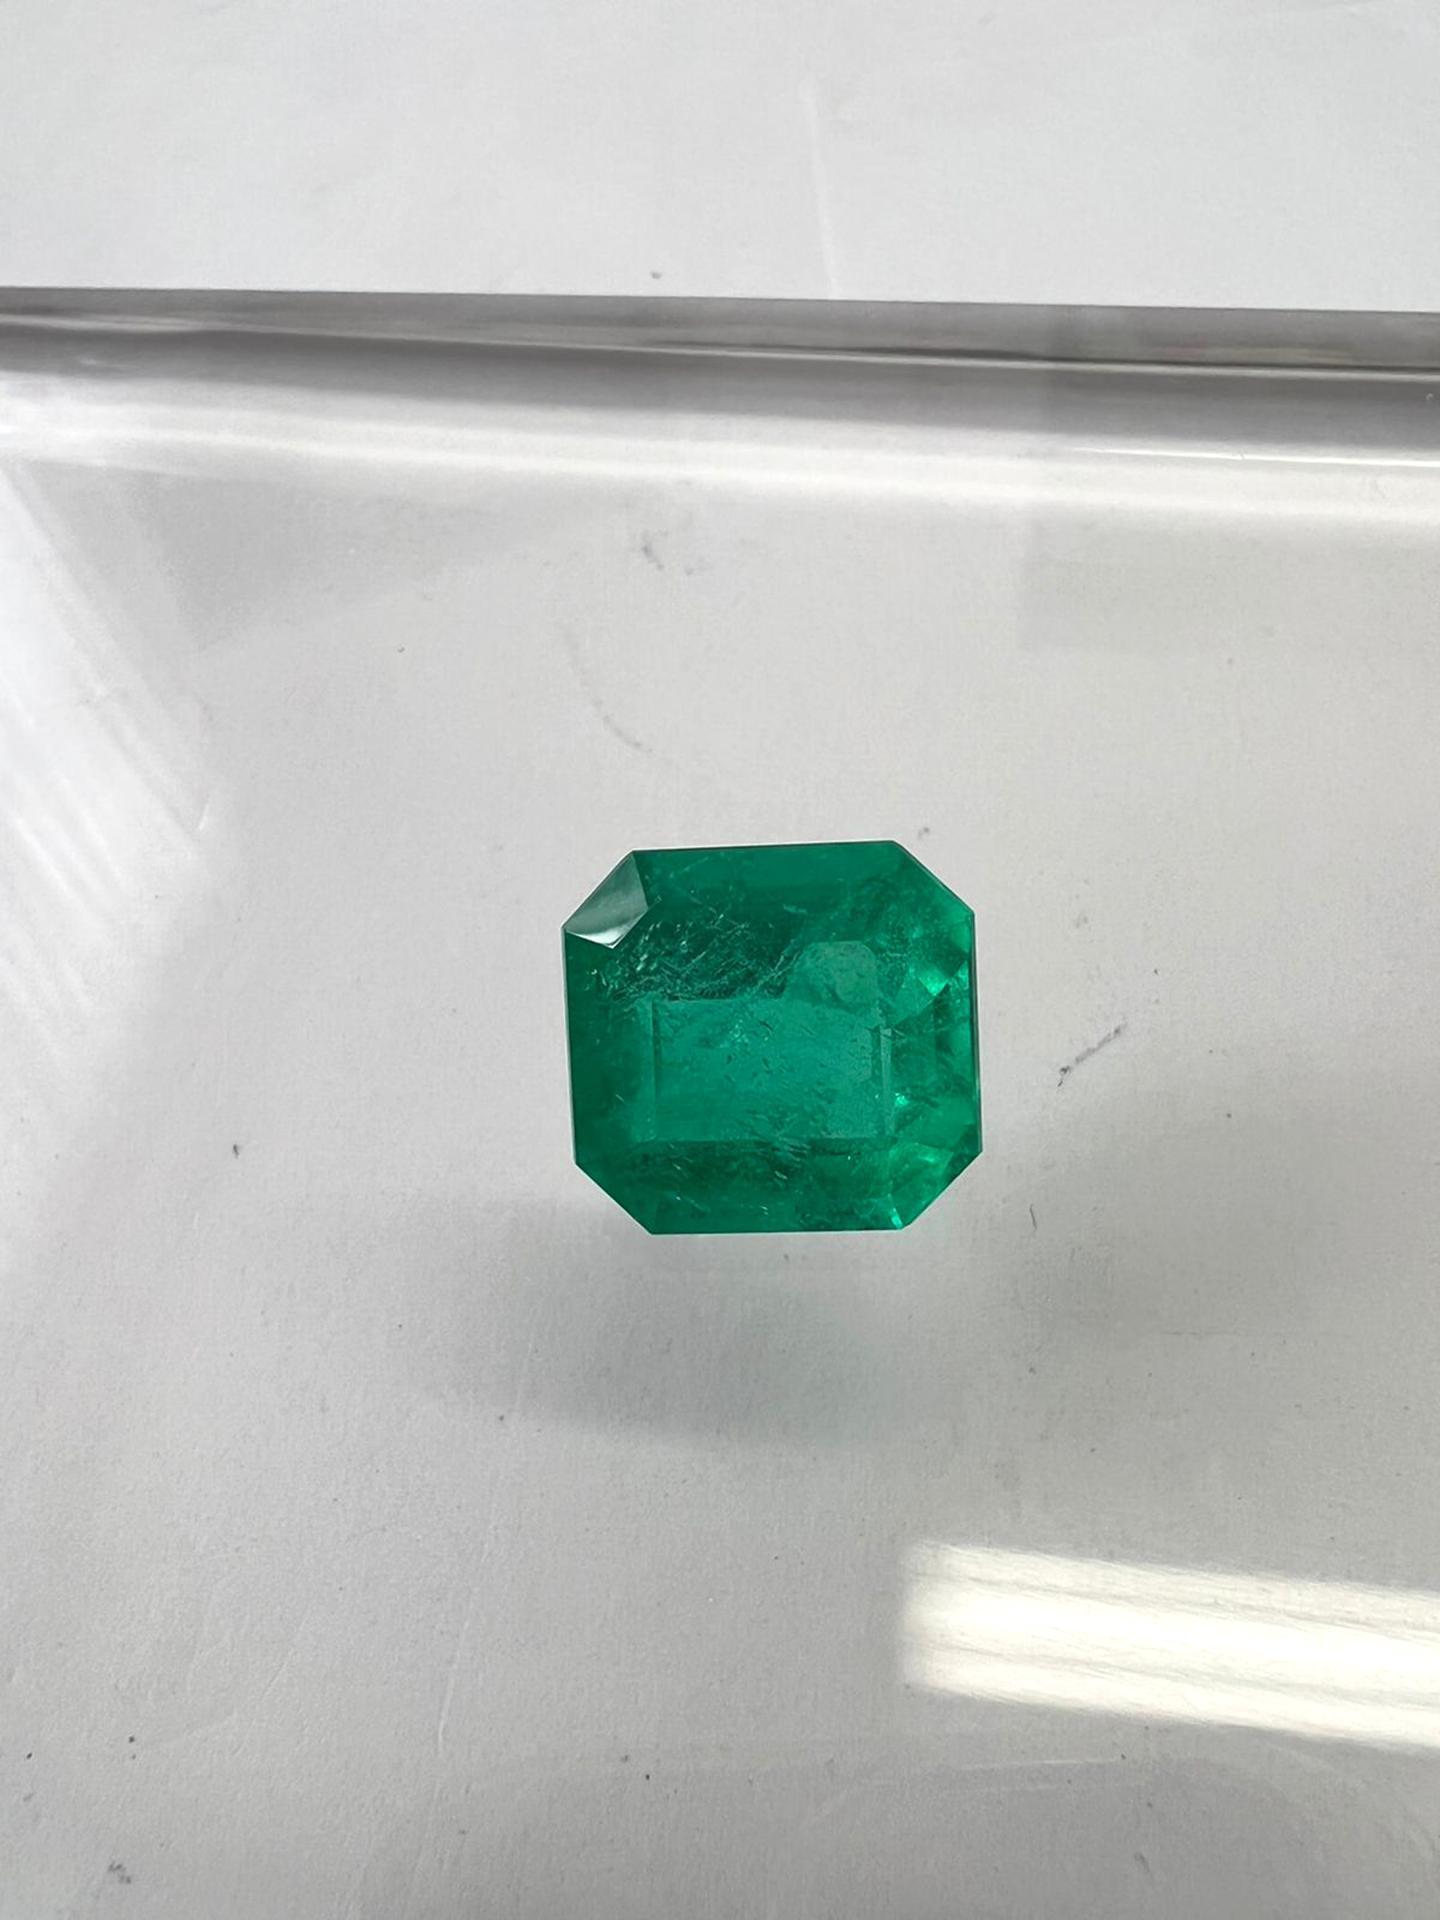 15.26 Ct.  Colombian Emerald ( Exceptional) 